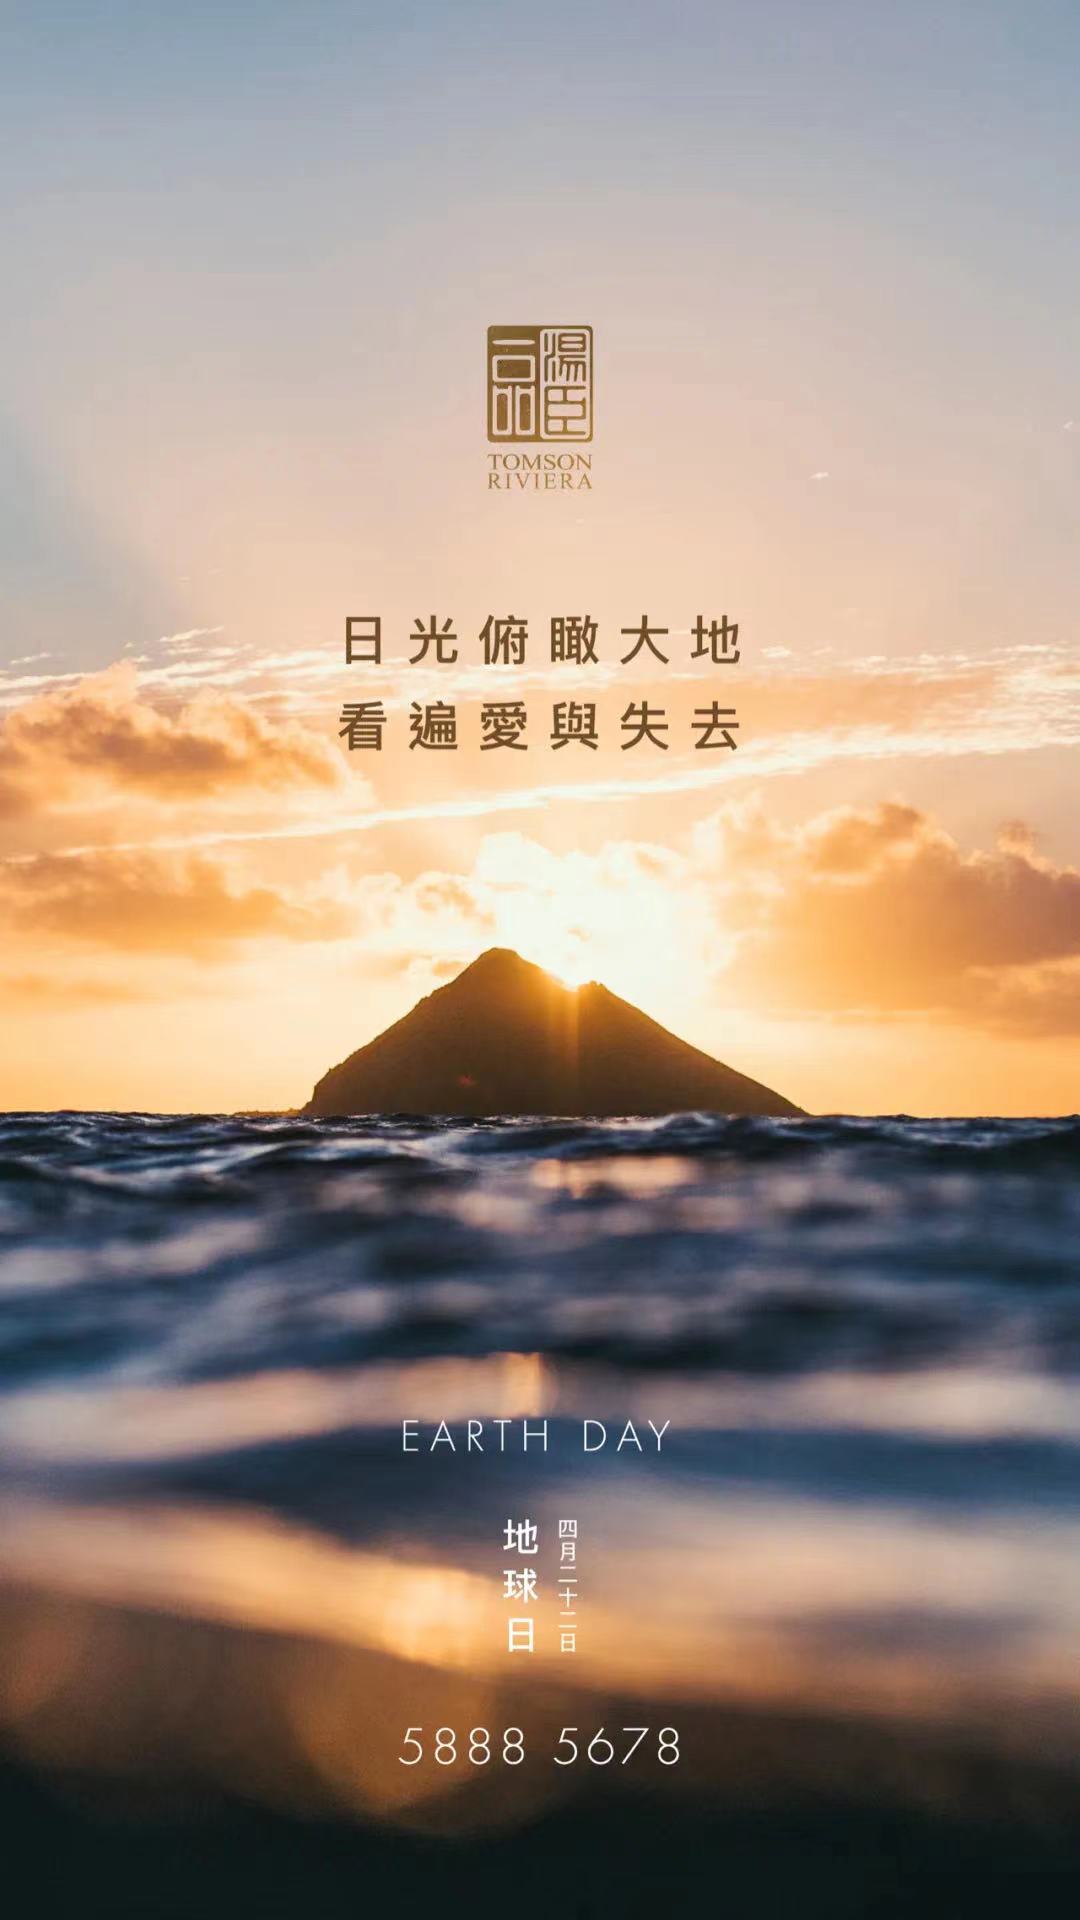 The Earth Day